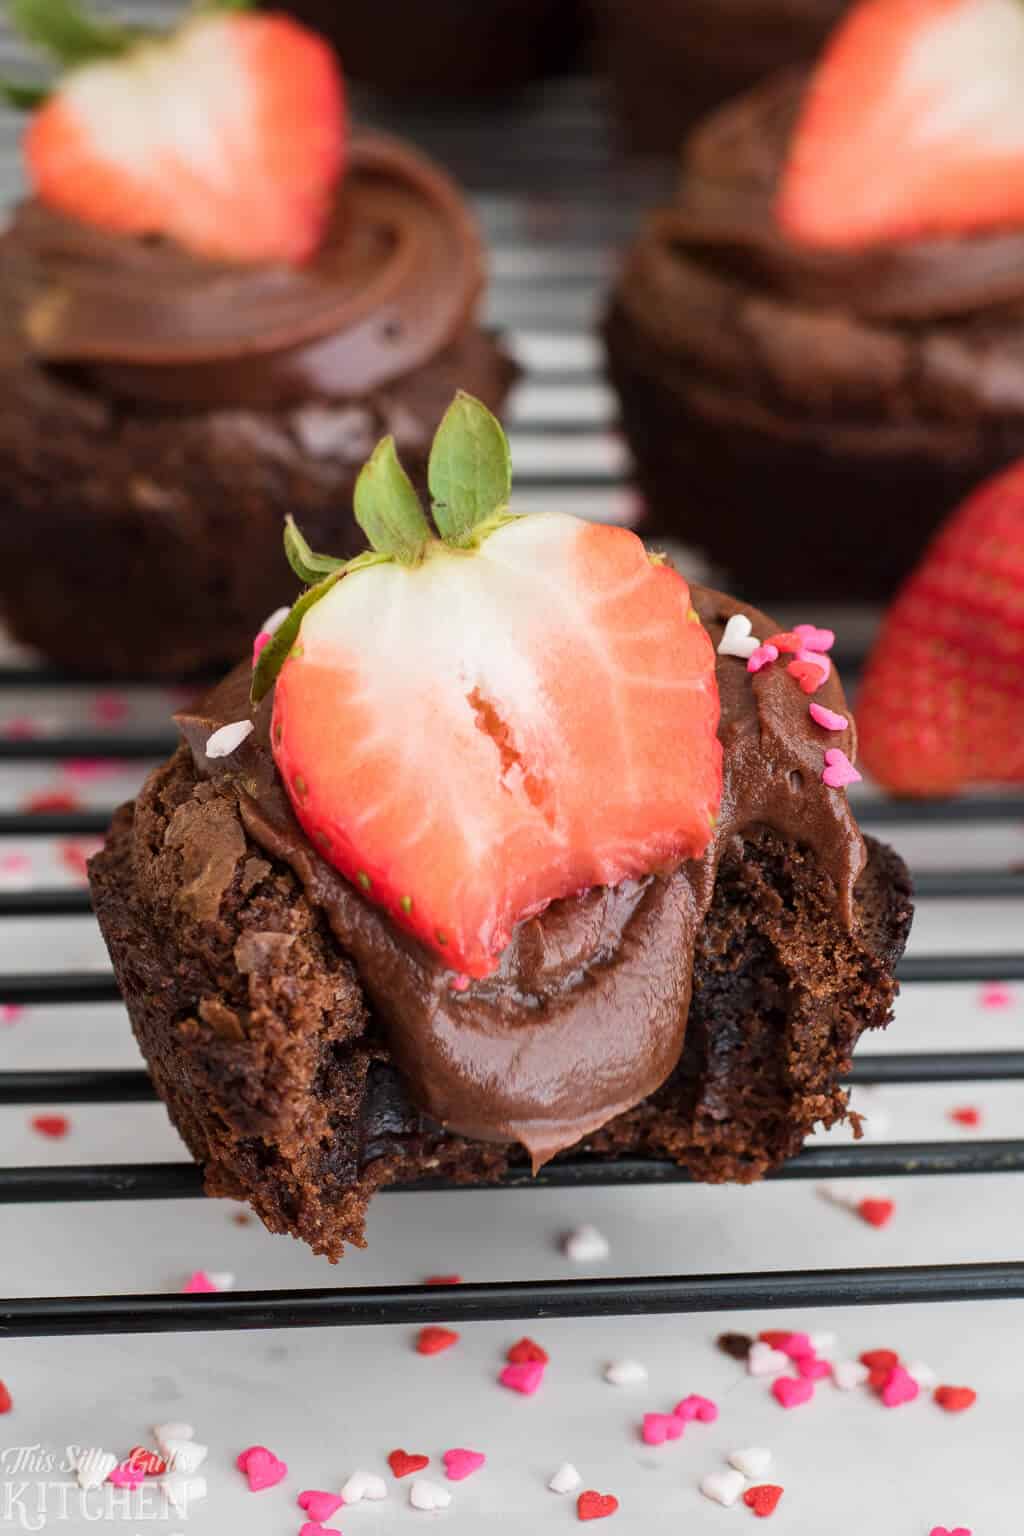 Strawberry Brownies, an easy yet delicious treat for your Valentine! #Recipe from ThisSillyGirlsKitchen.com #brownie #strawberry #chocolate